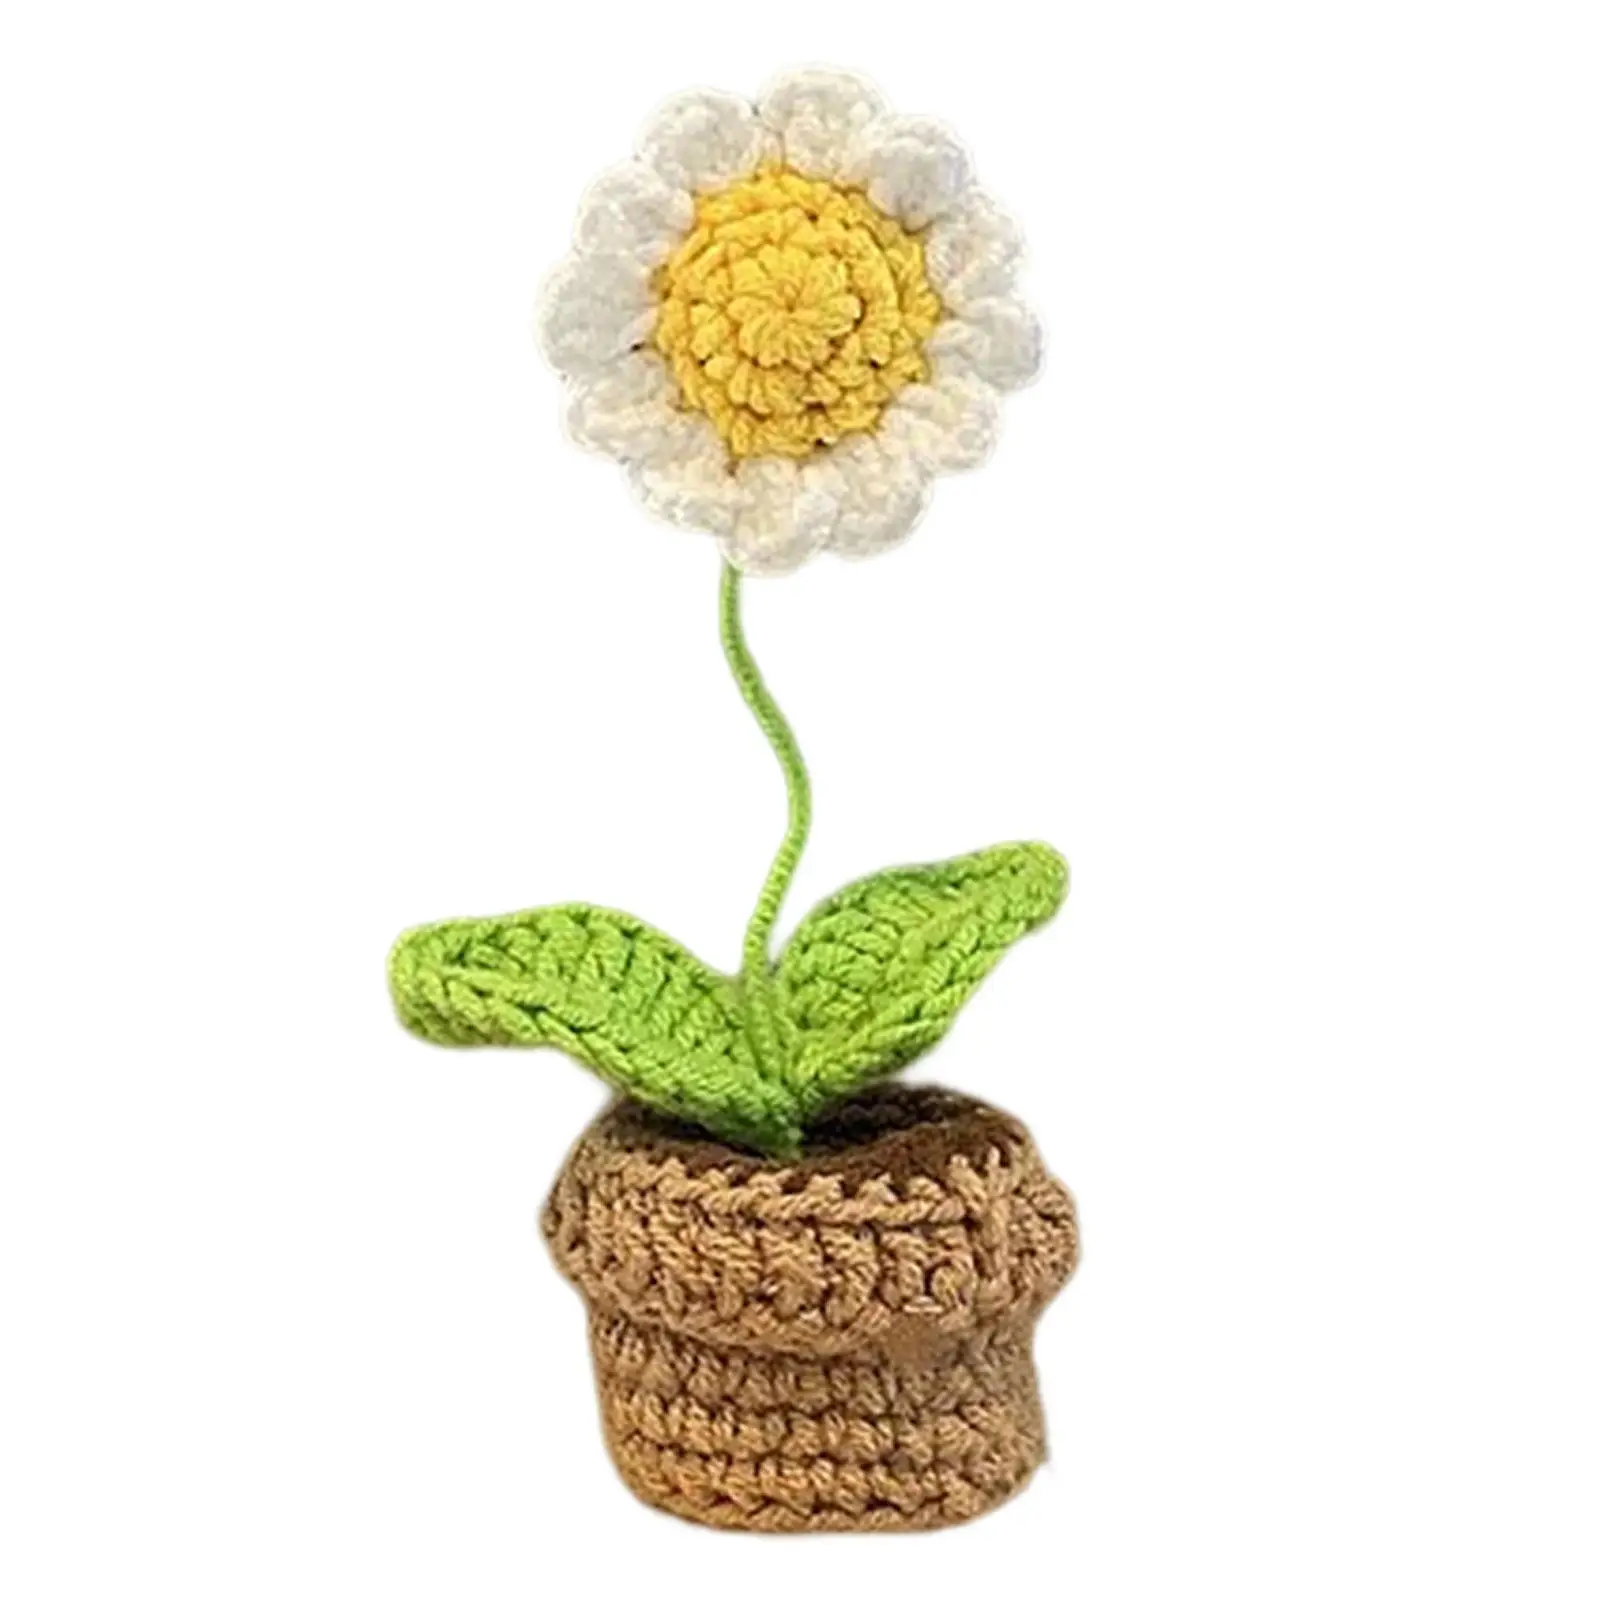 Knitting Crochet Flowers Dashboard Decoration Potted Flower for Office Home Ornaments